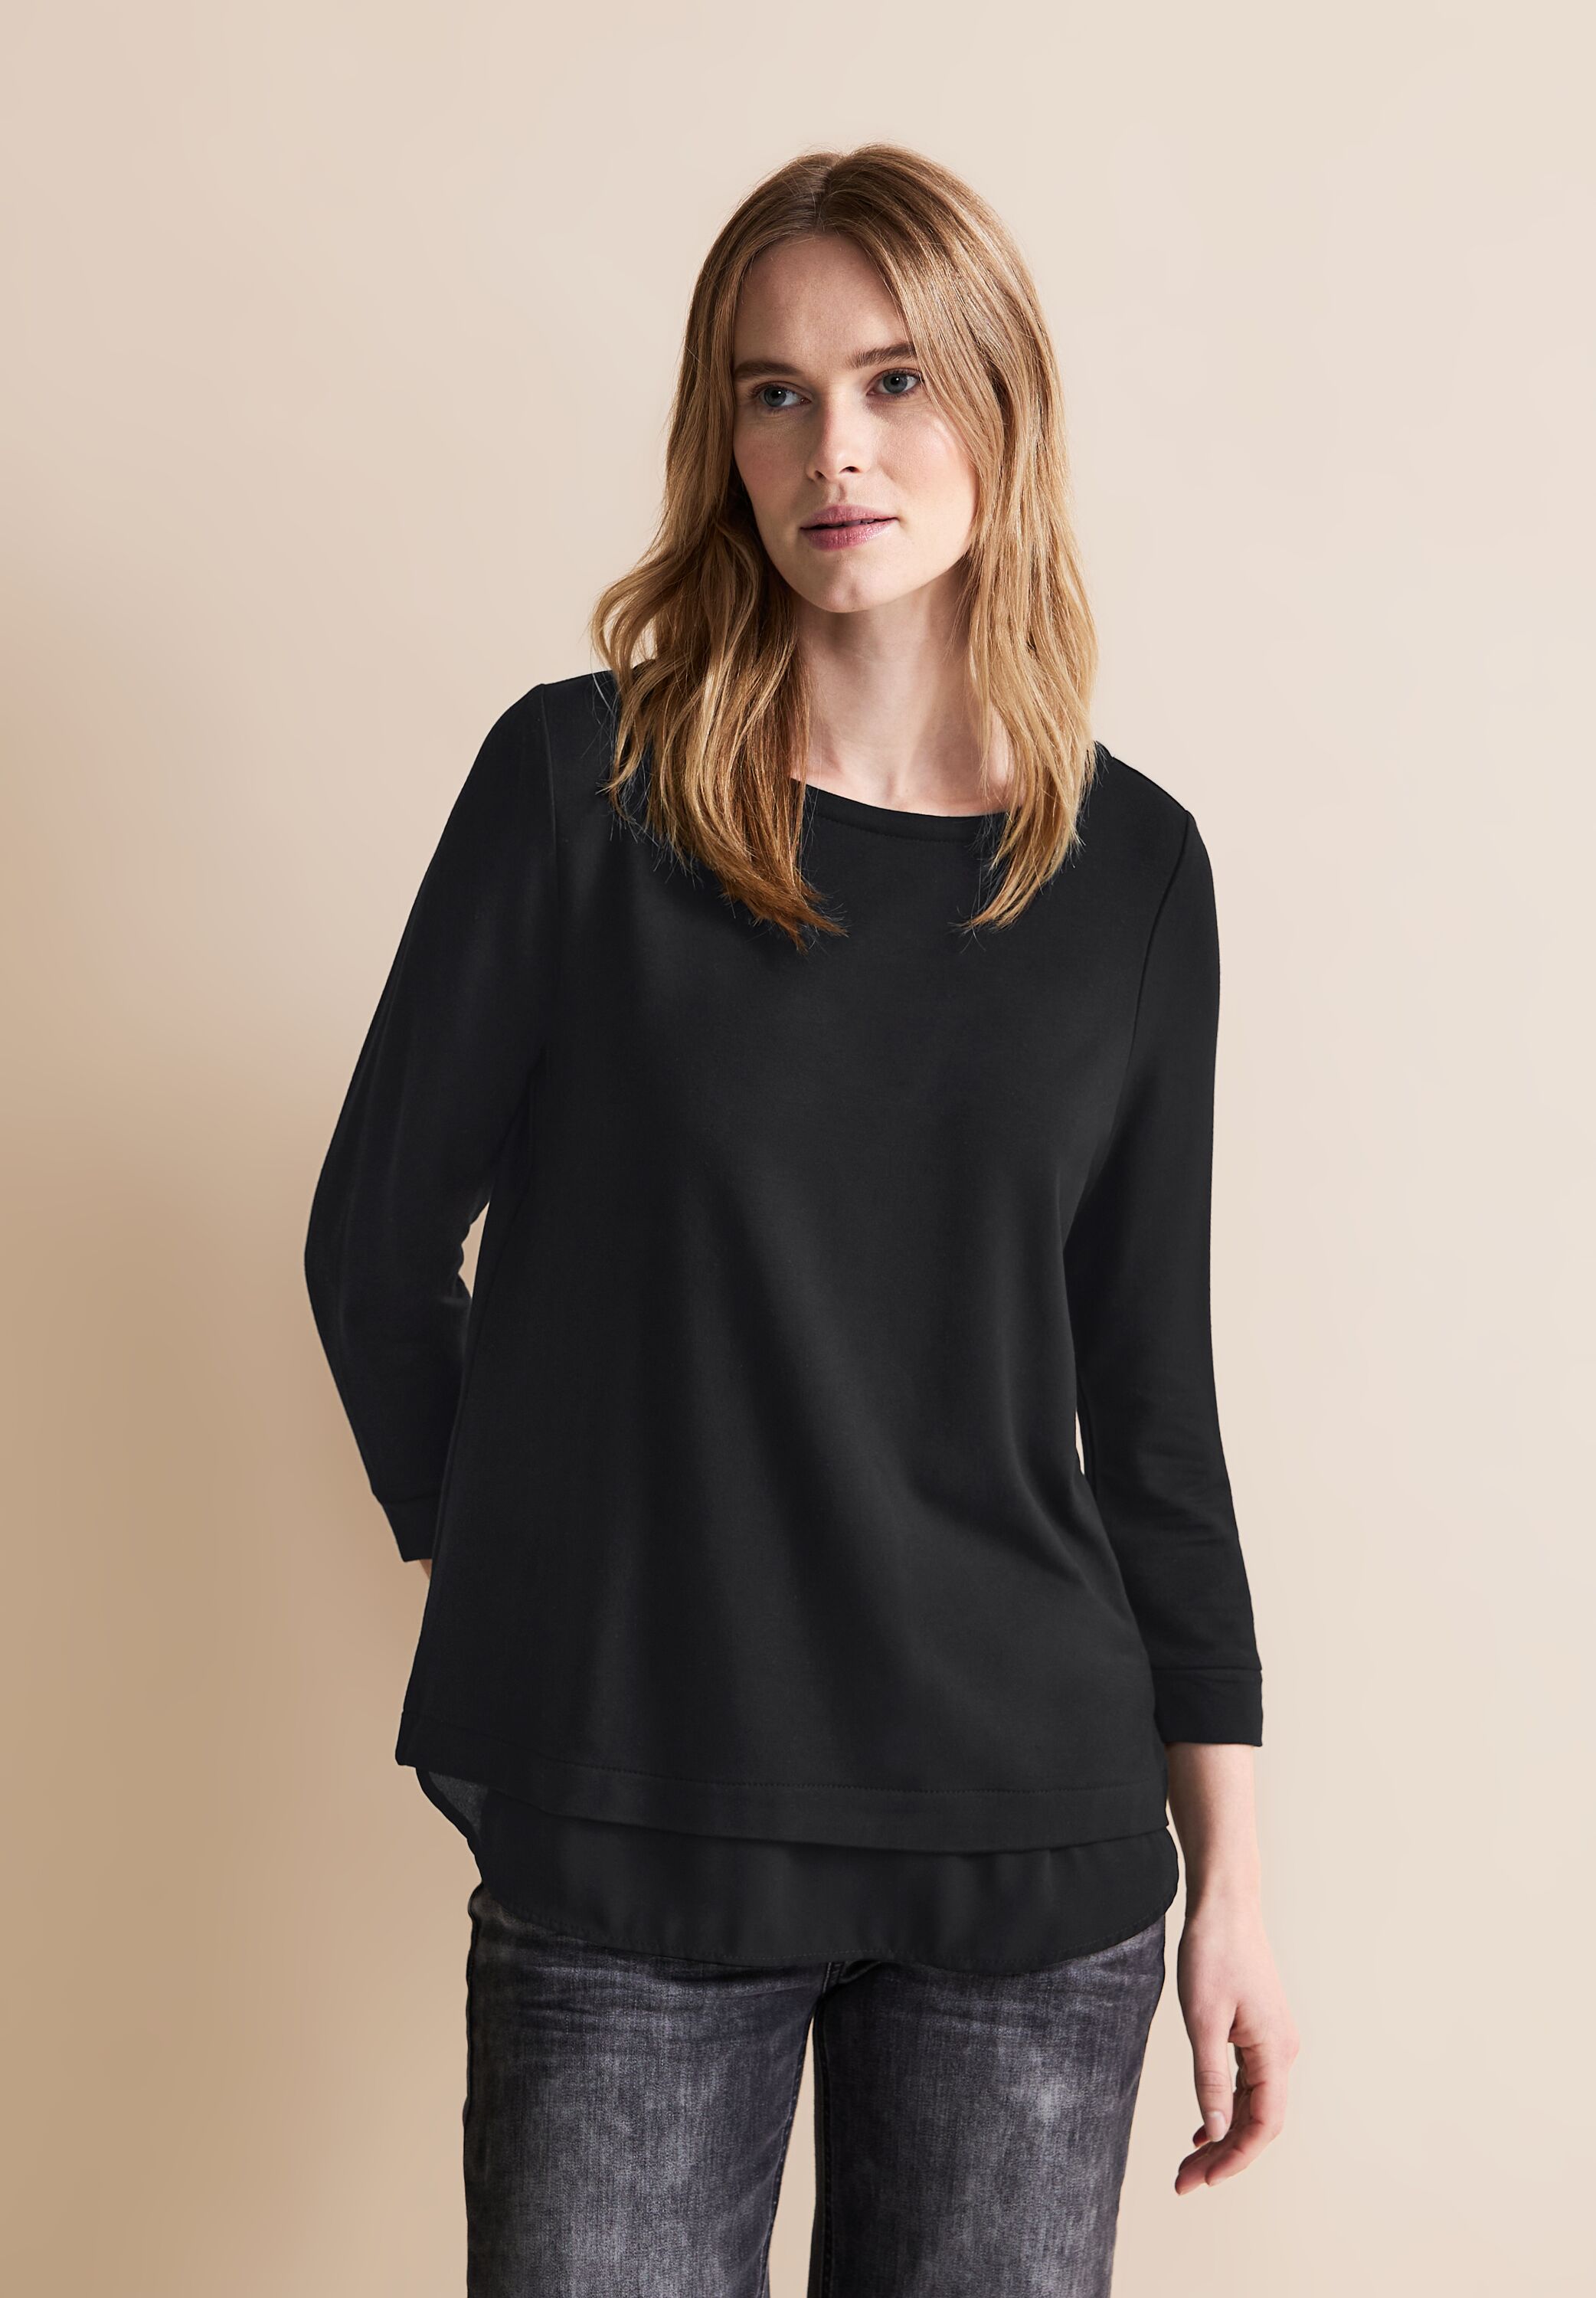 Mode Shirt - A320770-10001 Street CONCEPT One Black in